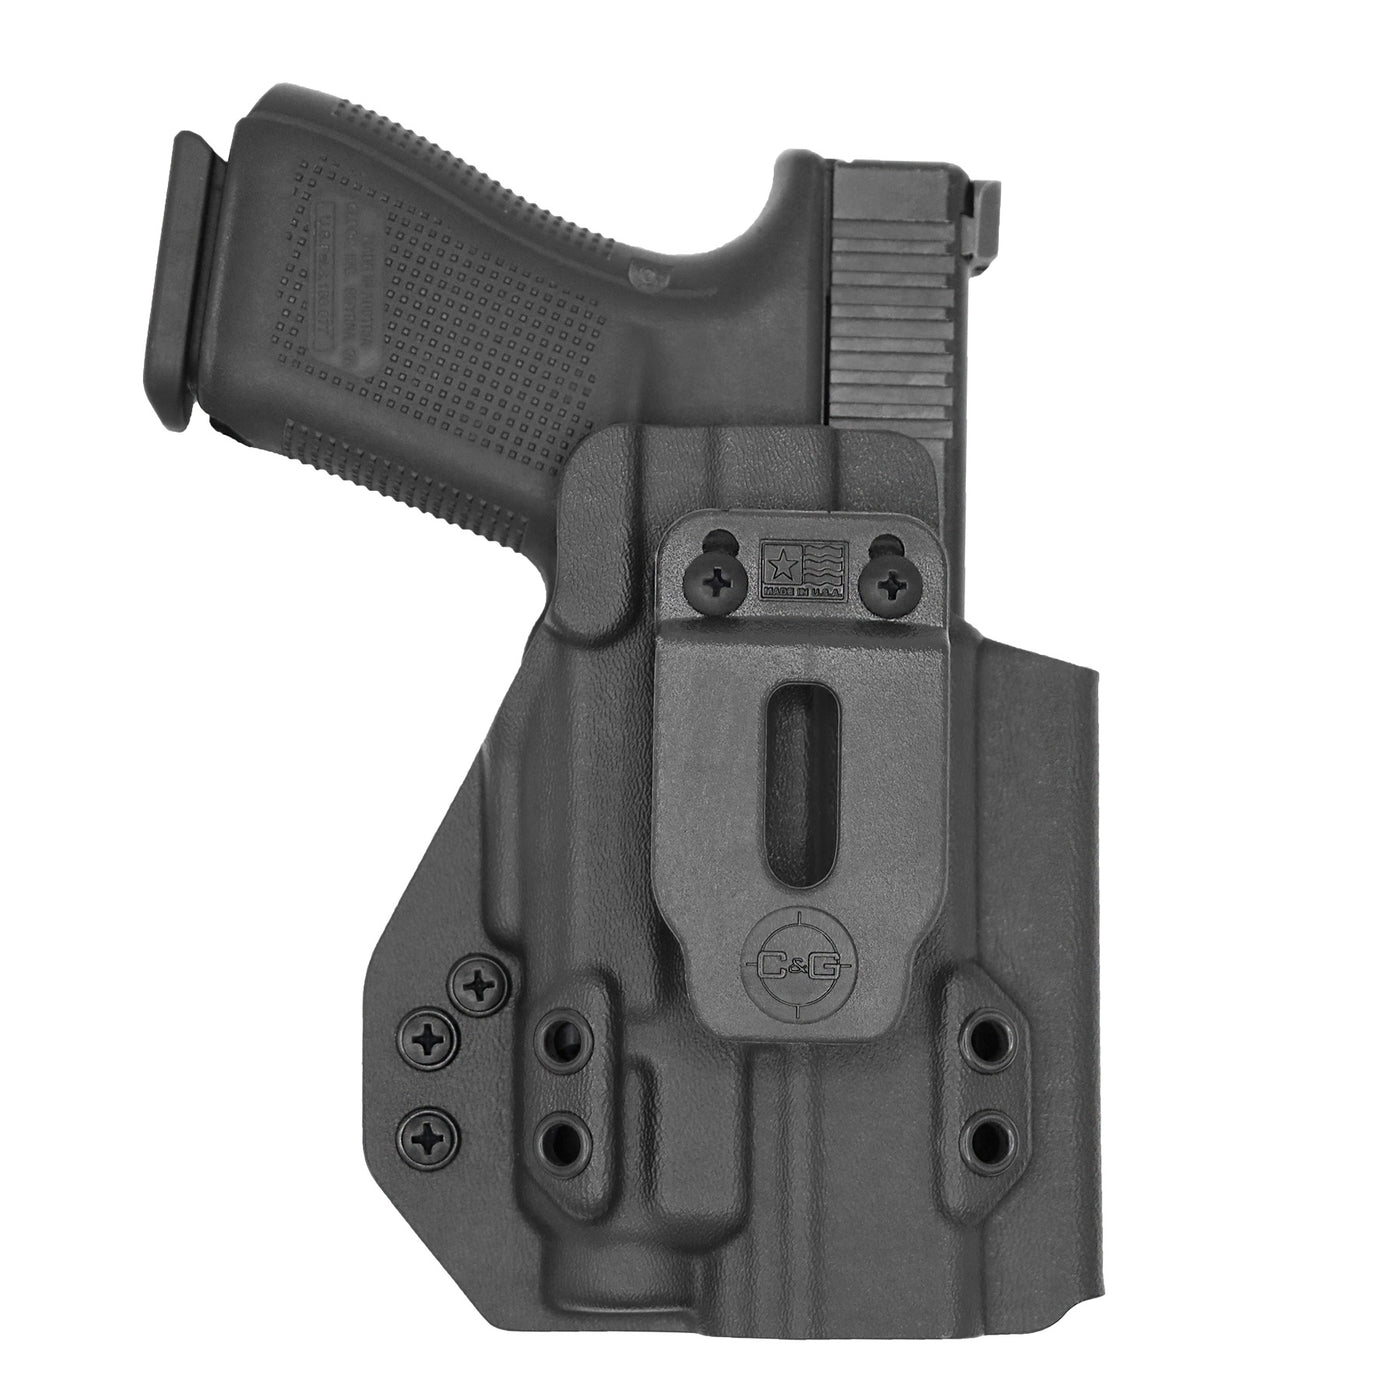 C&G Holsters quickship IWB Tactical OZ9/c streamlight tlr7/a in holstered position